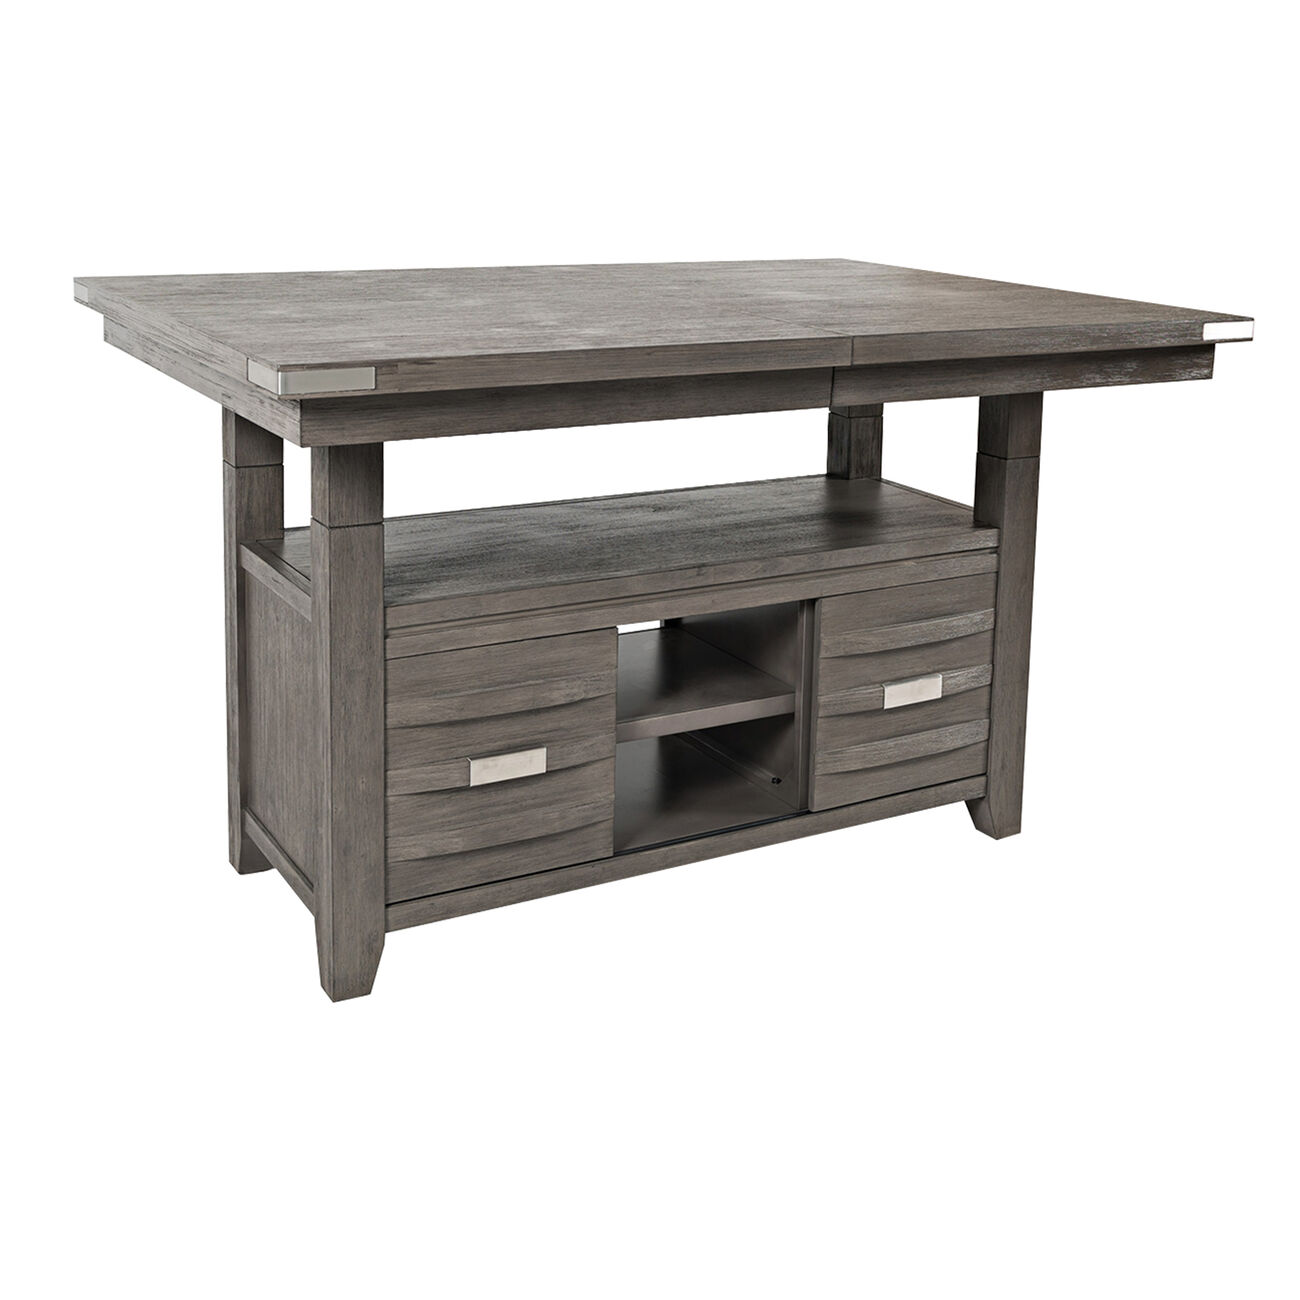 Rectangular Counter Height Table with 6 Shelves and Extension Leaf, Gray